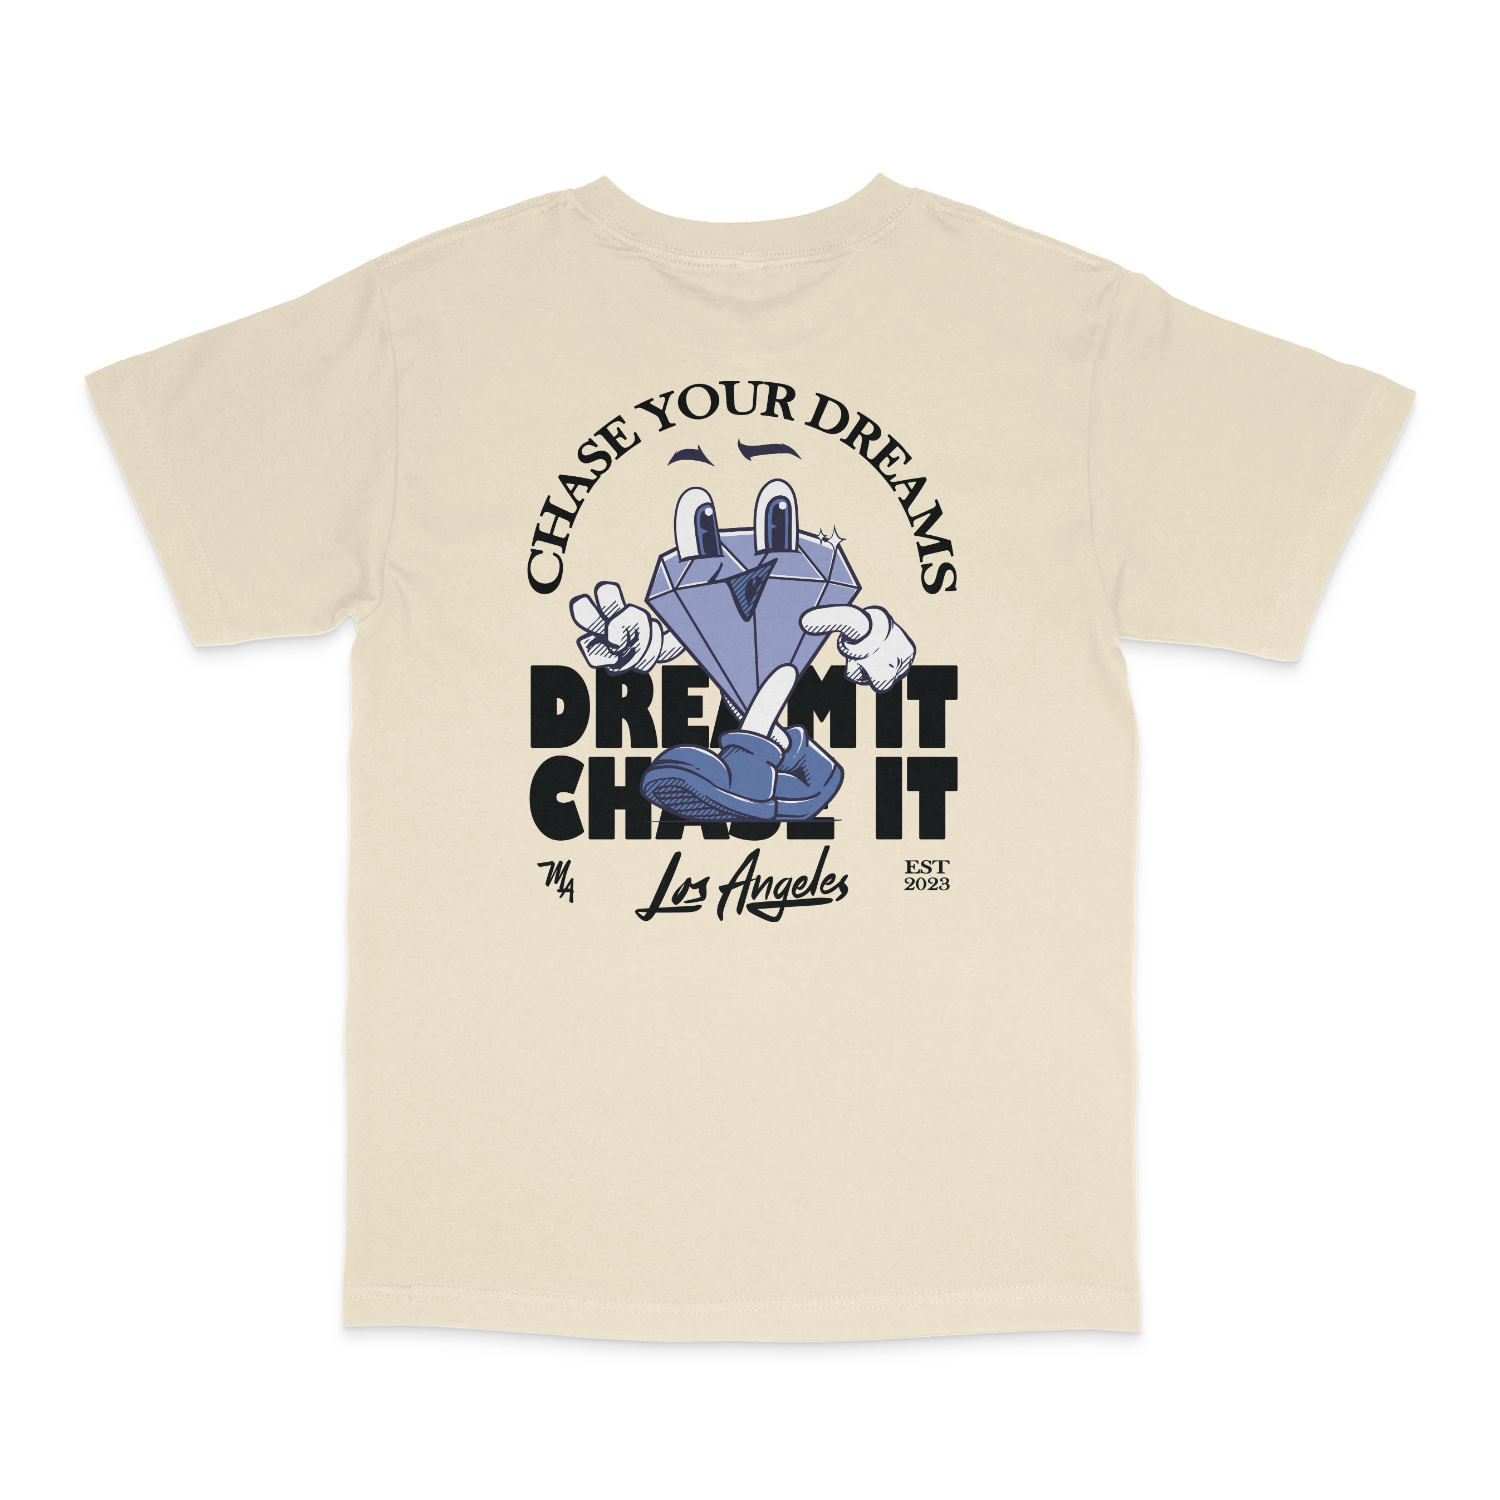 Chase It. Dream It. Tee